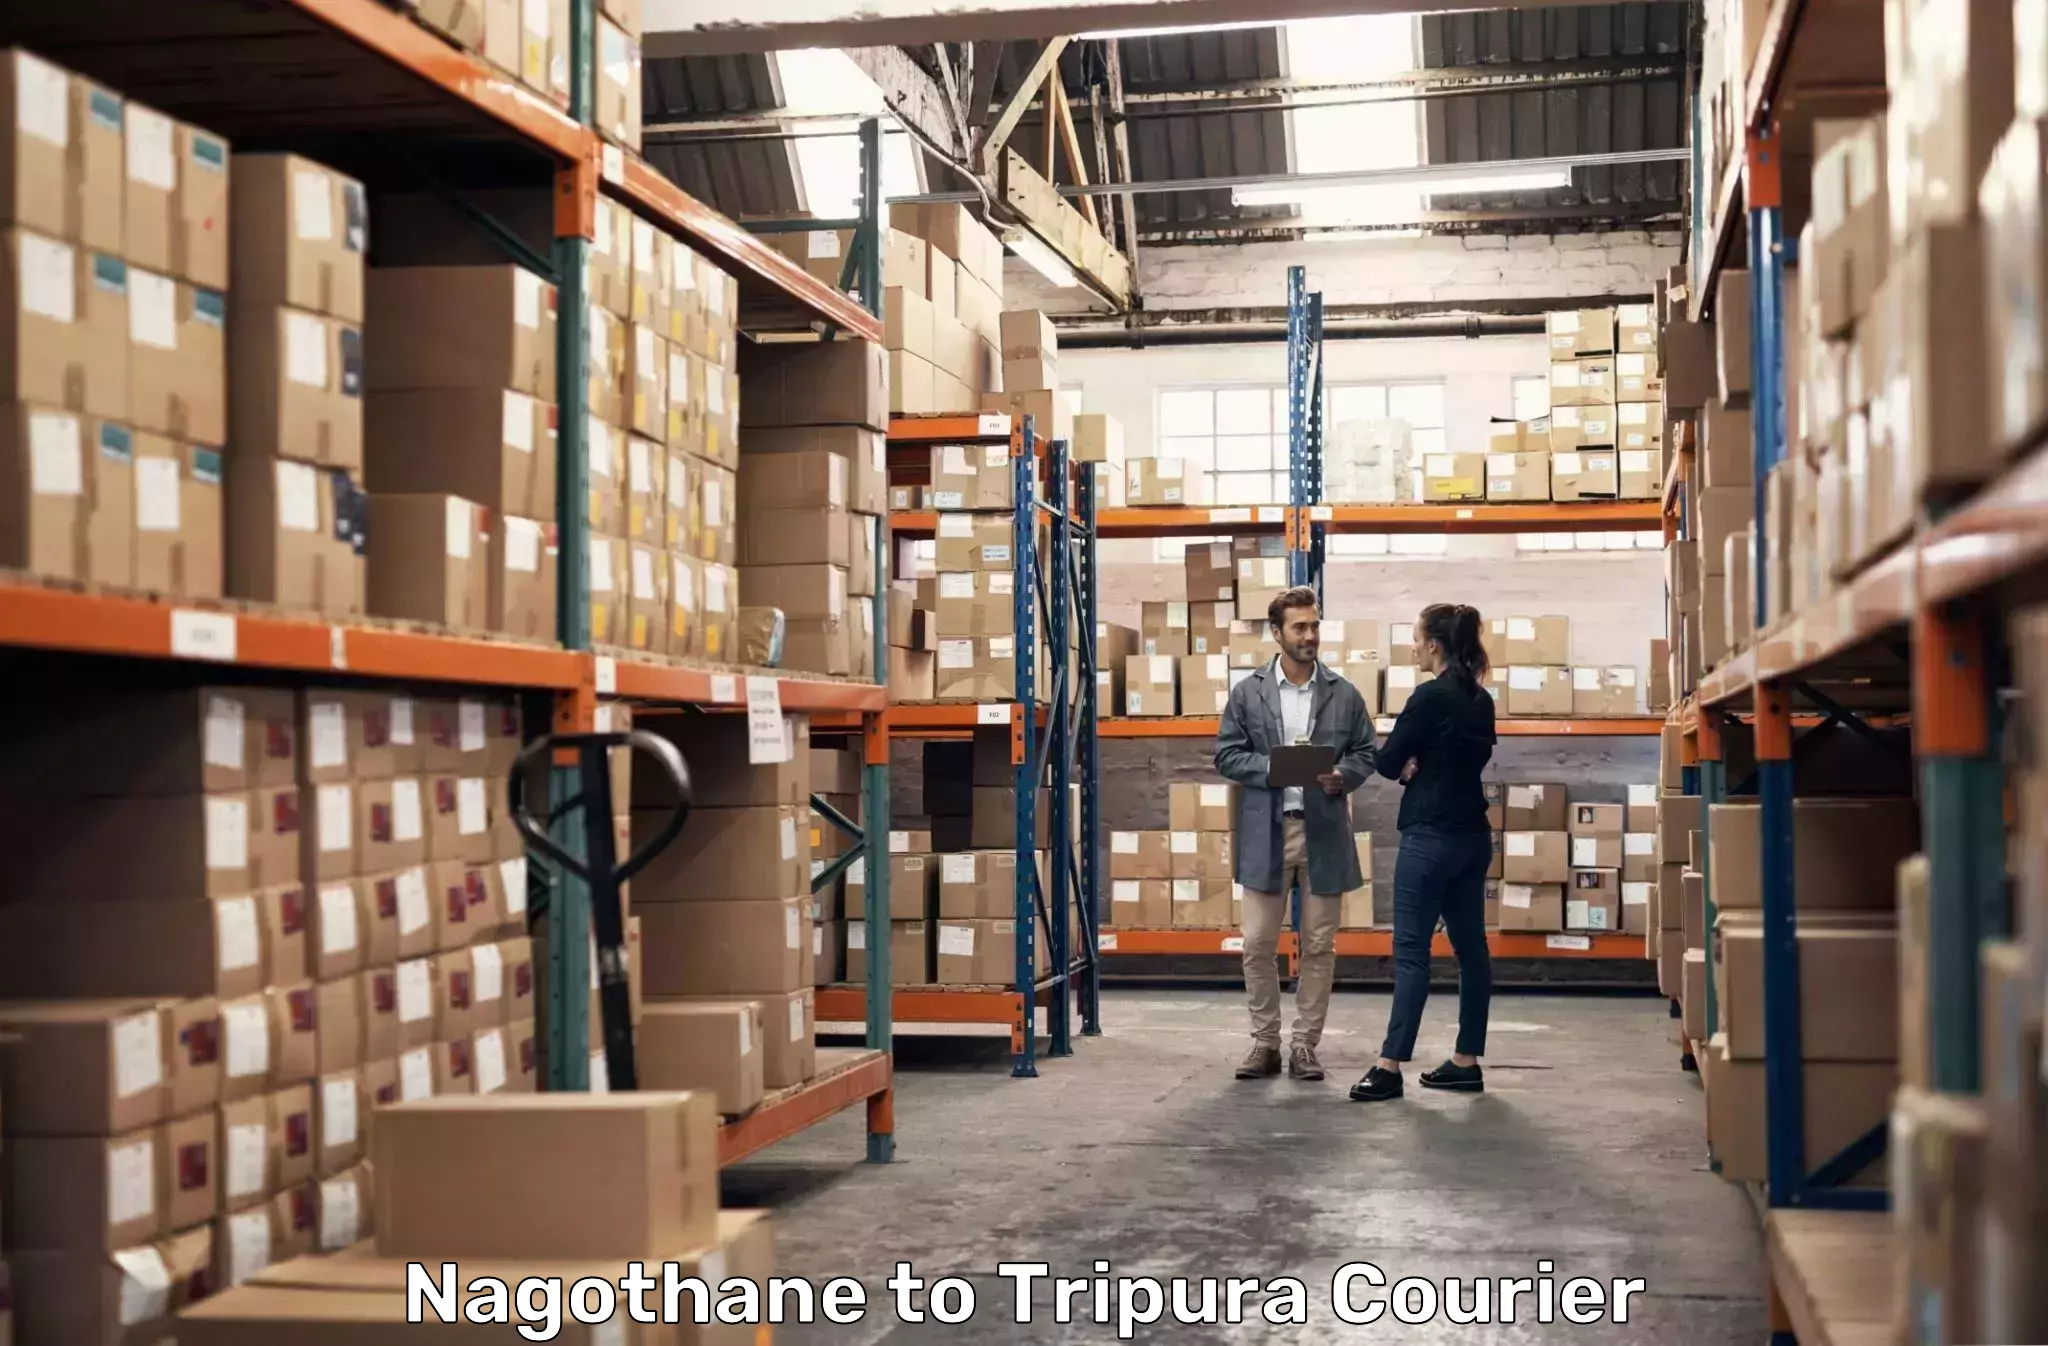 Cost-effective courier options Nagothane to Udaipur Tripura